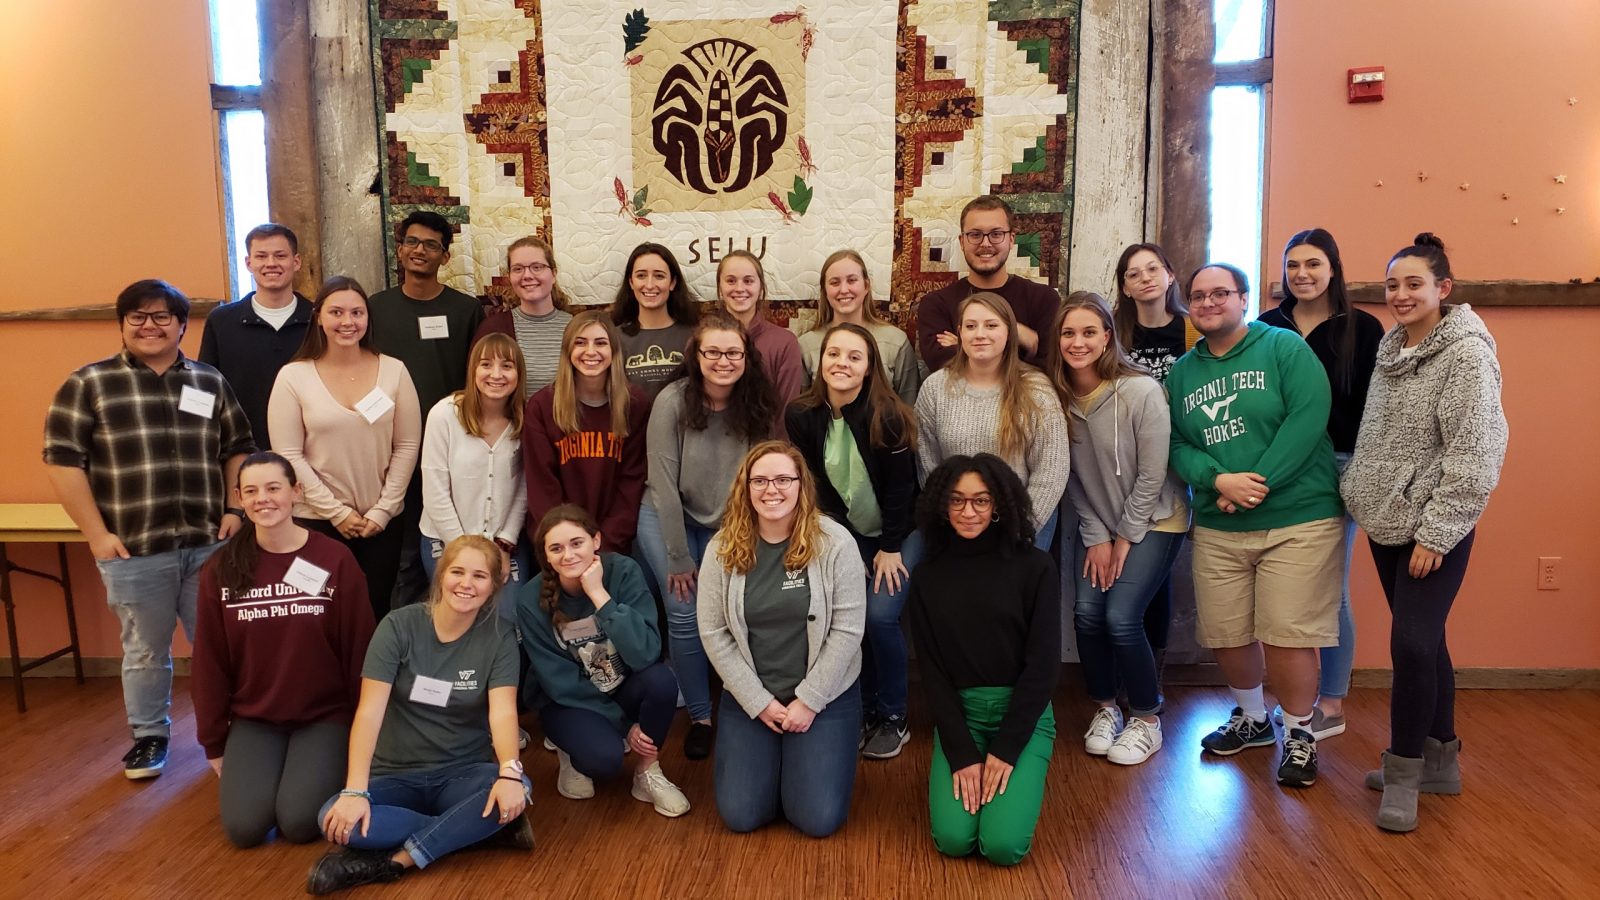 Our 2019-2020 Sustainability Interns visited Selu with the Radford Sustainability Interns to collaborate in activities and update each other on completed and ongoing campus sustainability projects.